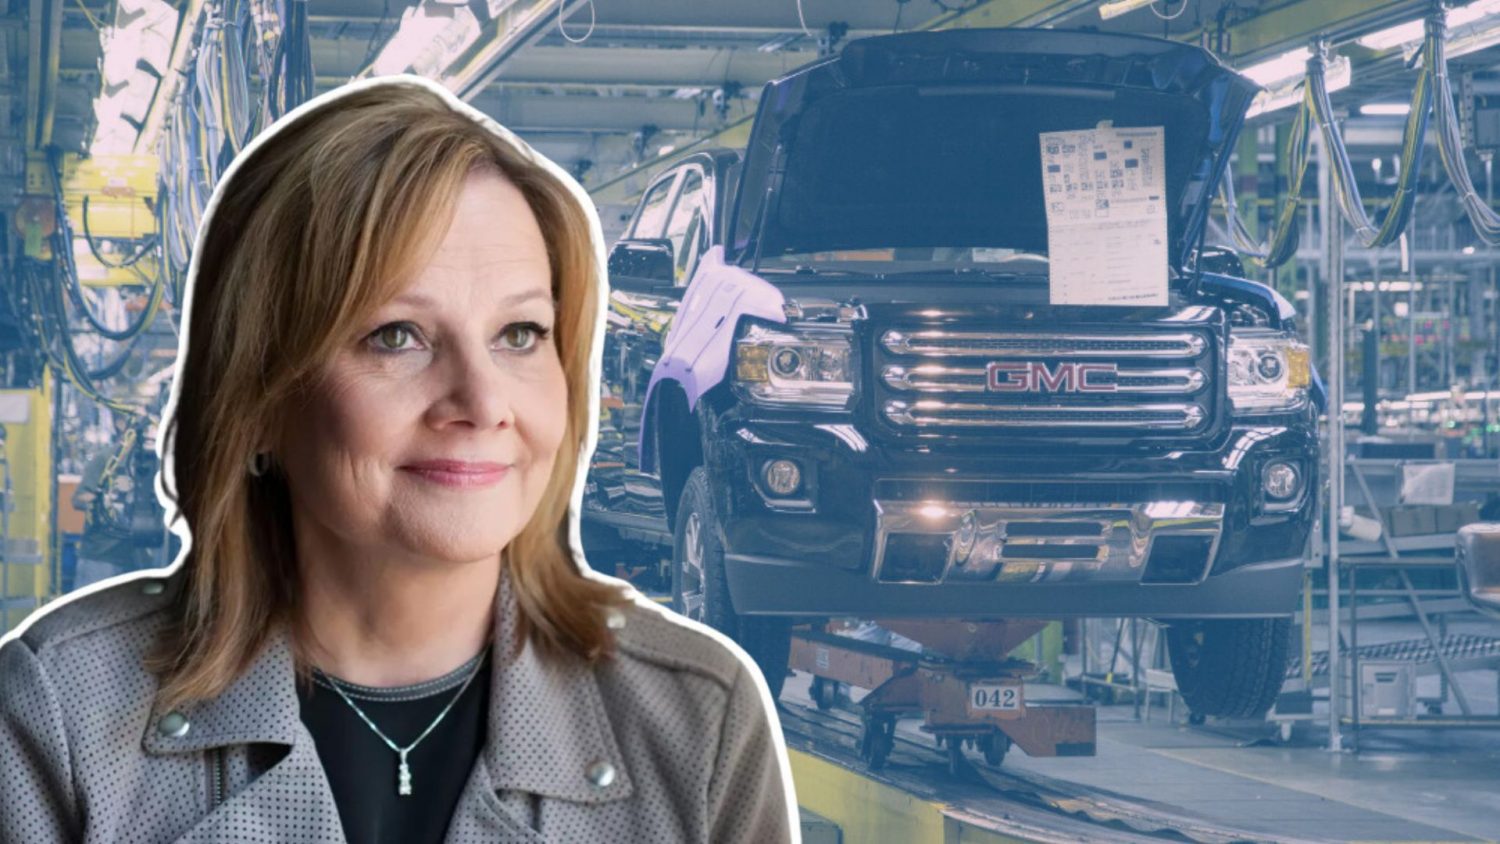 Despite possible headwinds in the economy and sales, GM exceeded Wall Street's projections for Q4 and is predicting another successful year.